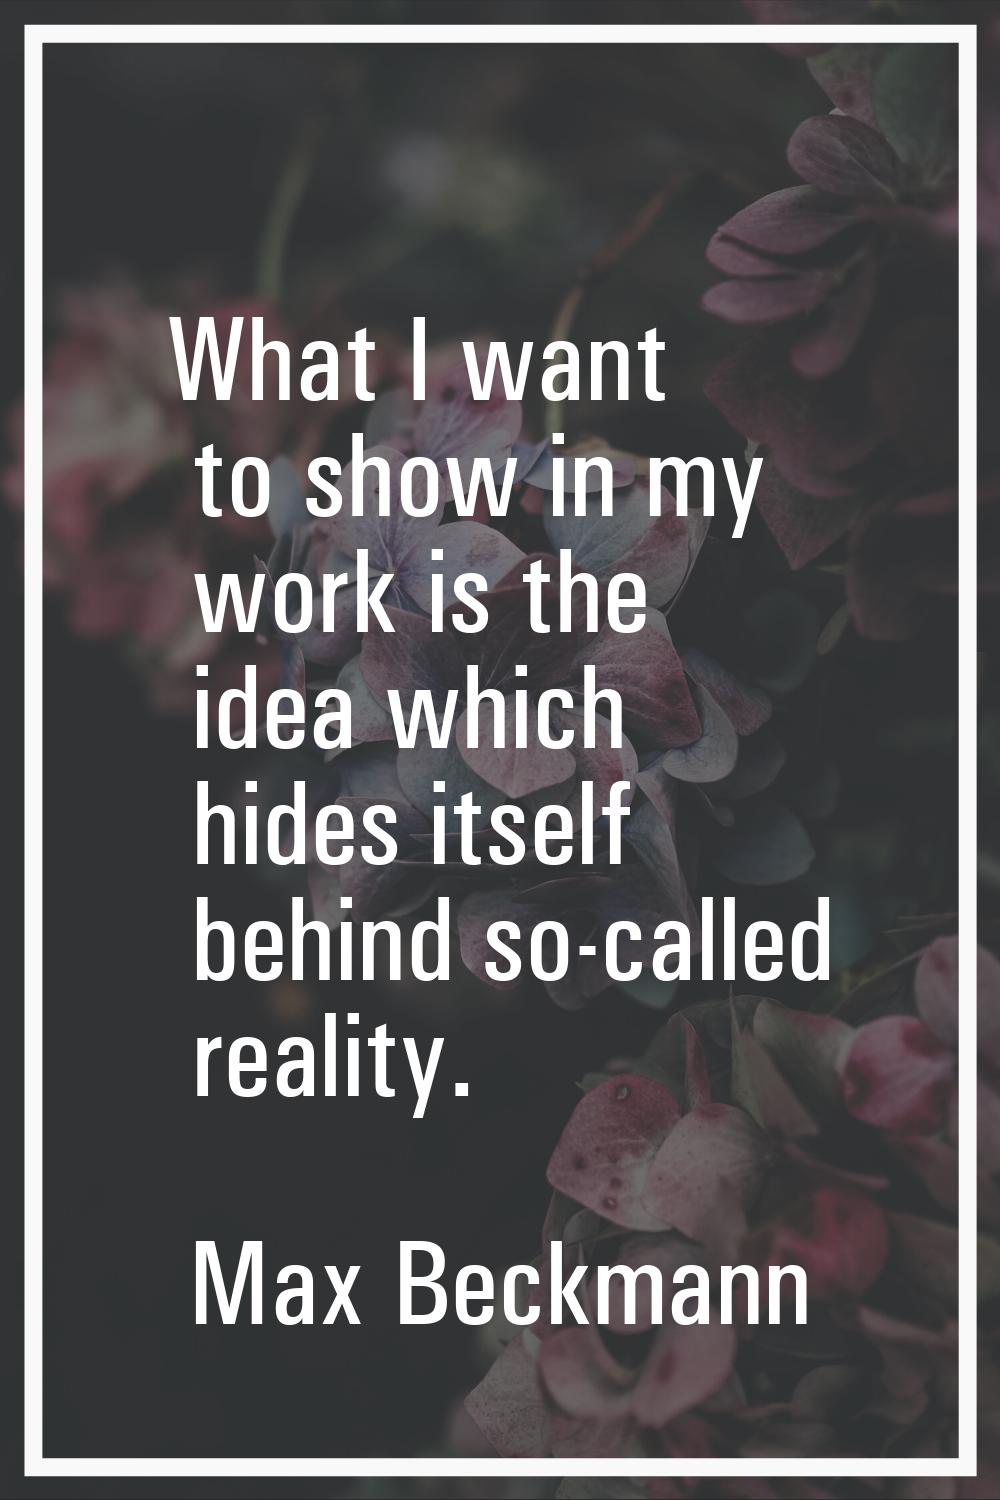 What I want to show in my work is the idea which hides itself behind so-called reality.